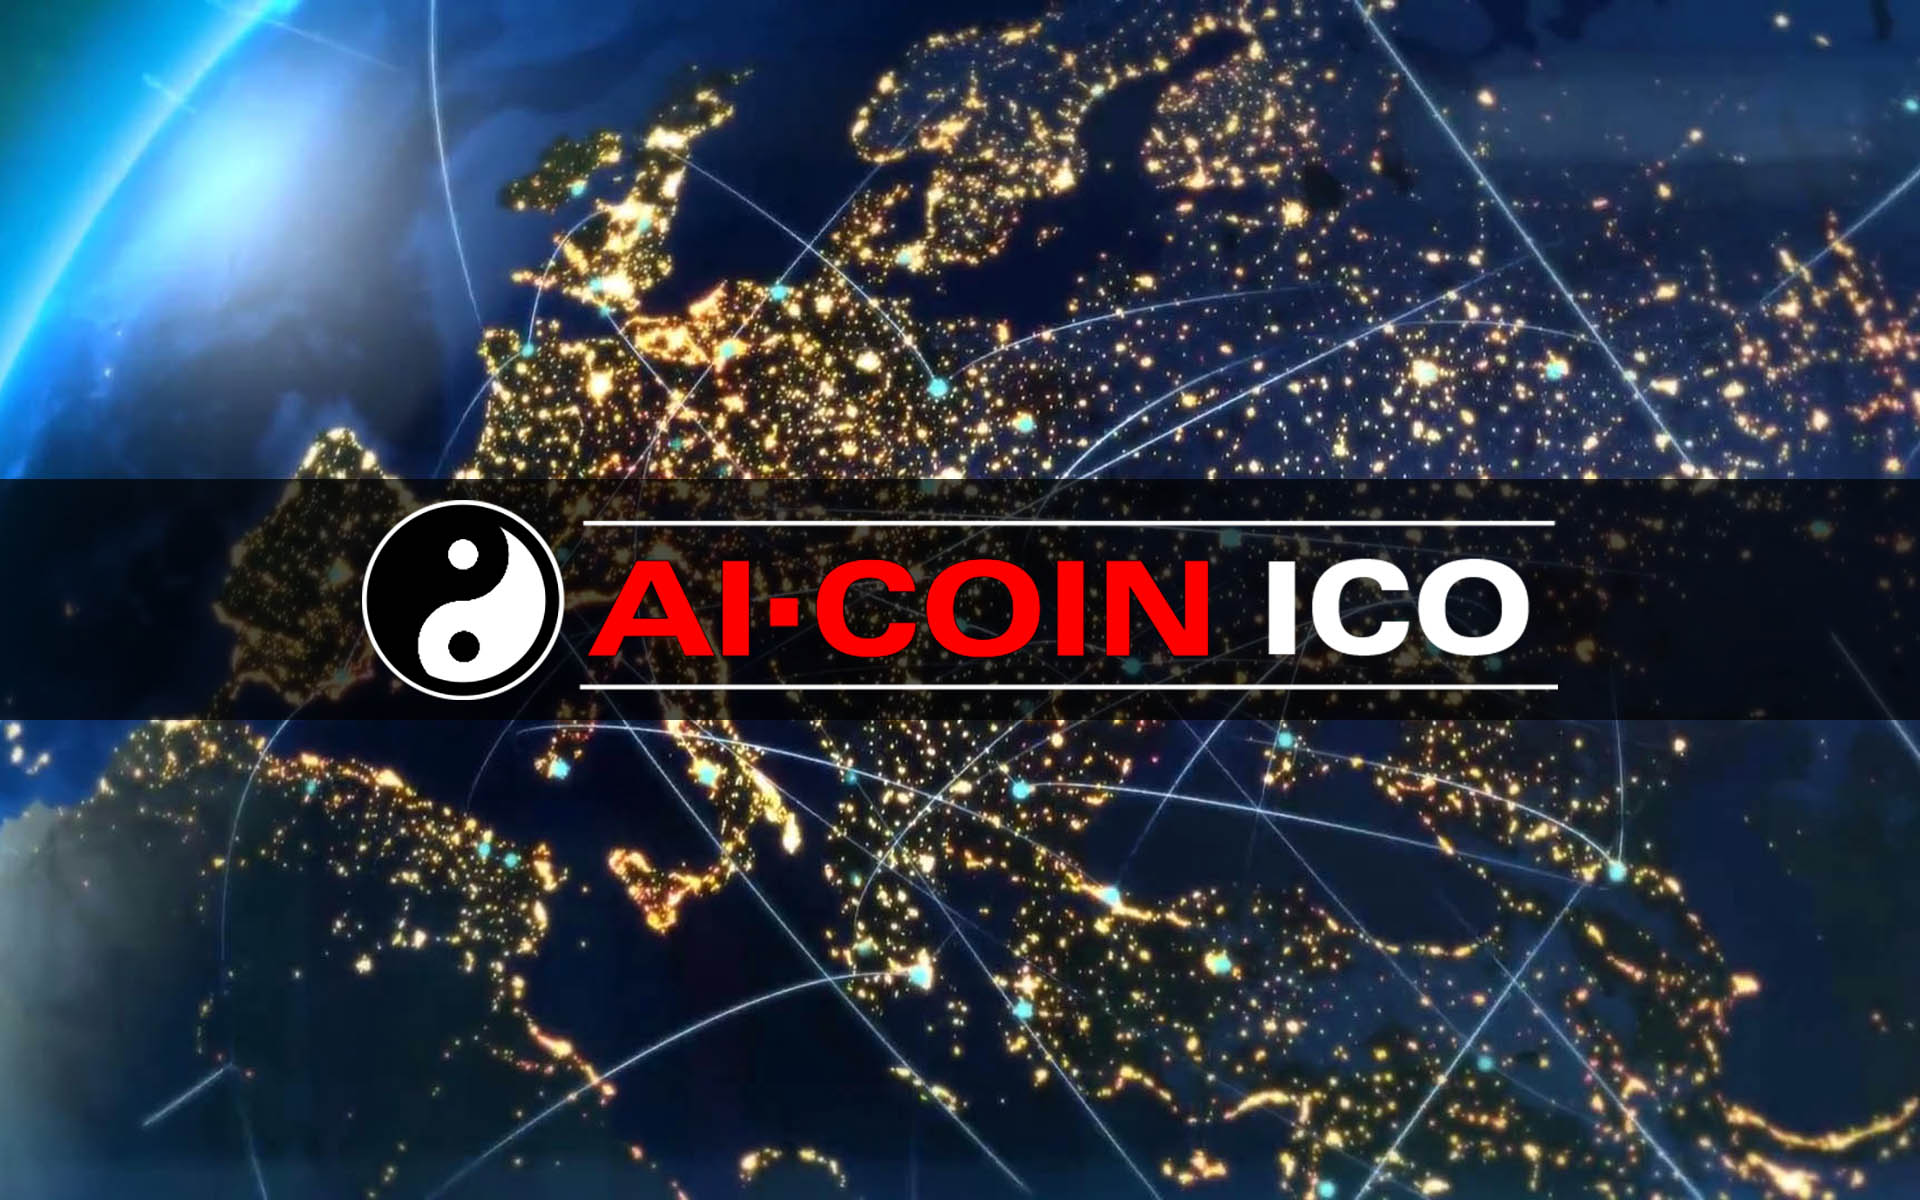 Jon Matonis Appointed as First Member of AICoin ICO Start-up Investment Board